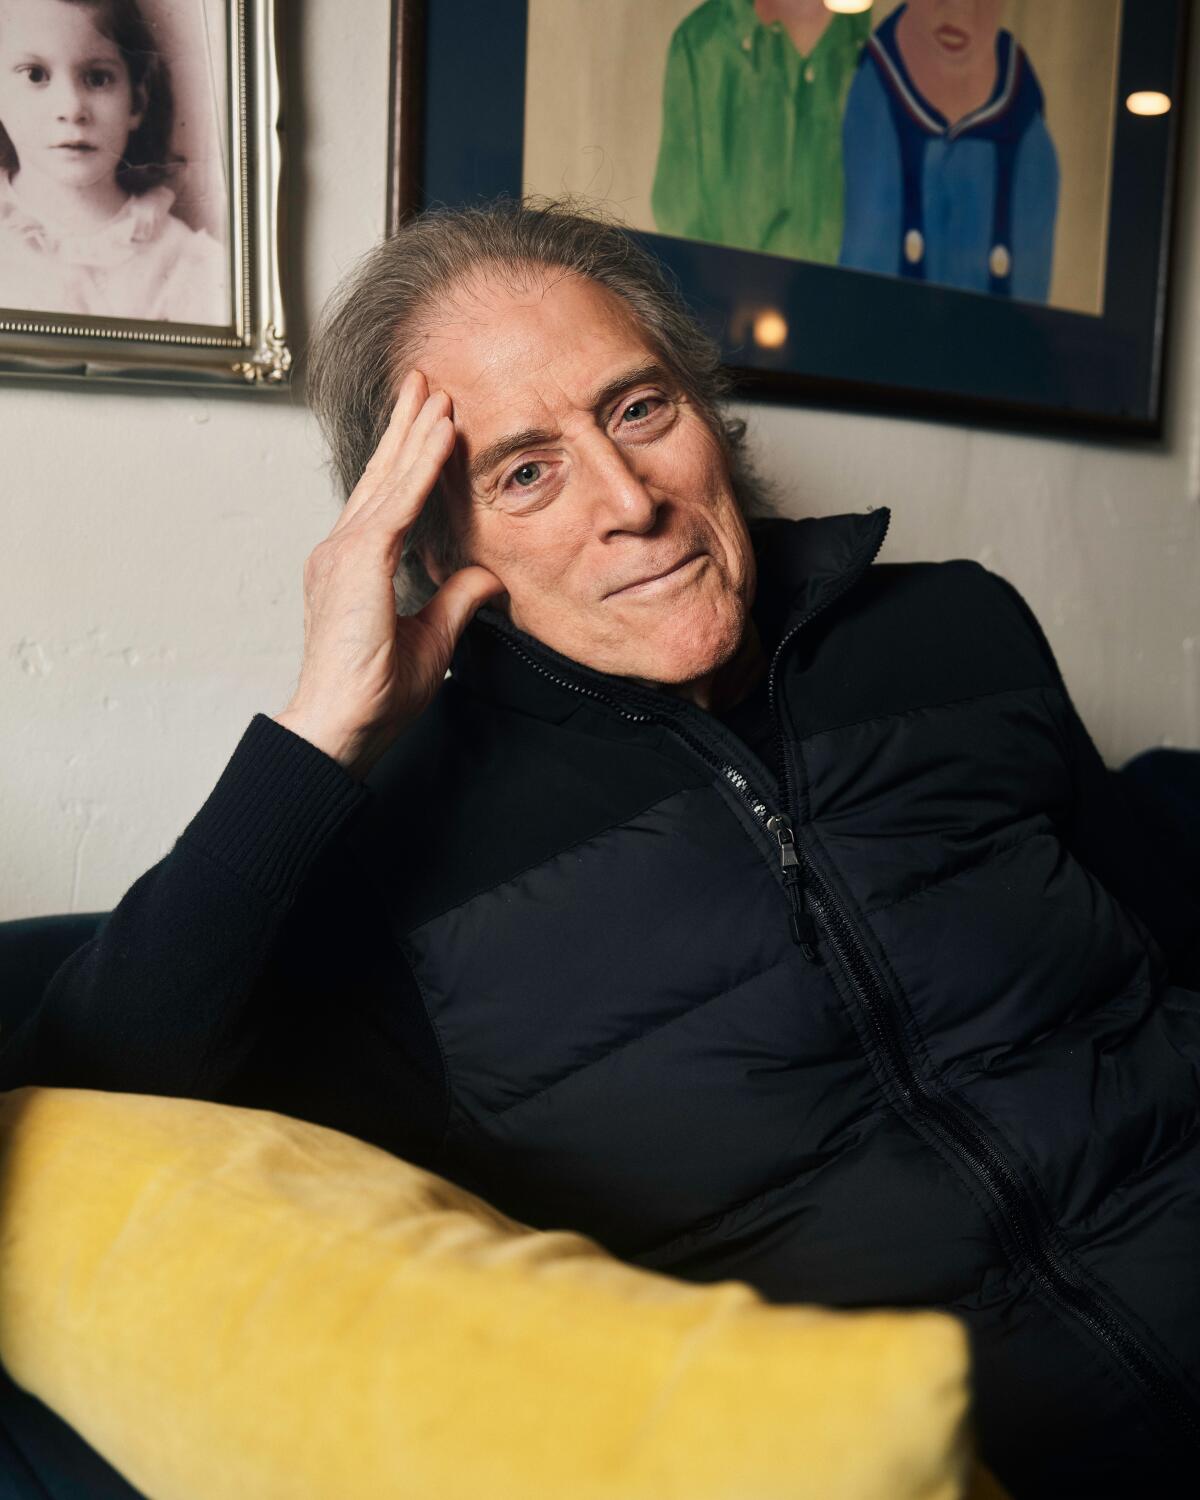 Richard Lewis is photographed in John O'Groats diner in Los Angeles, 